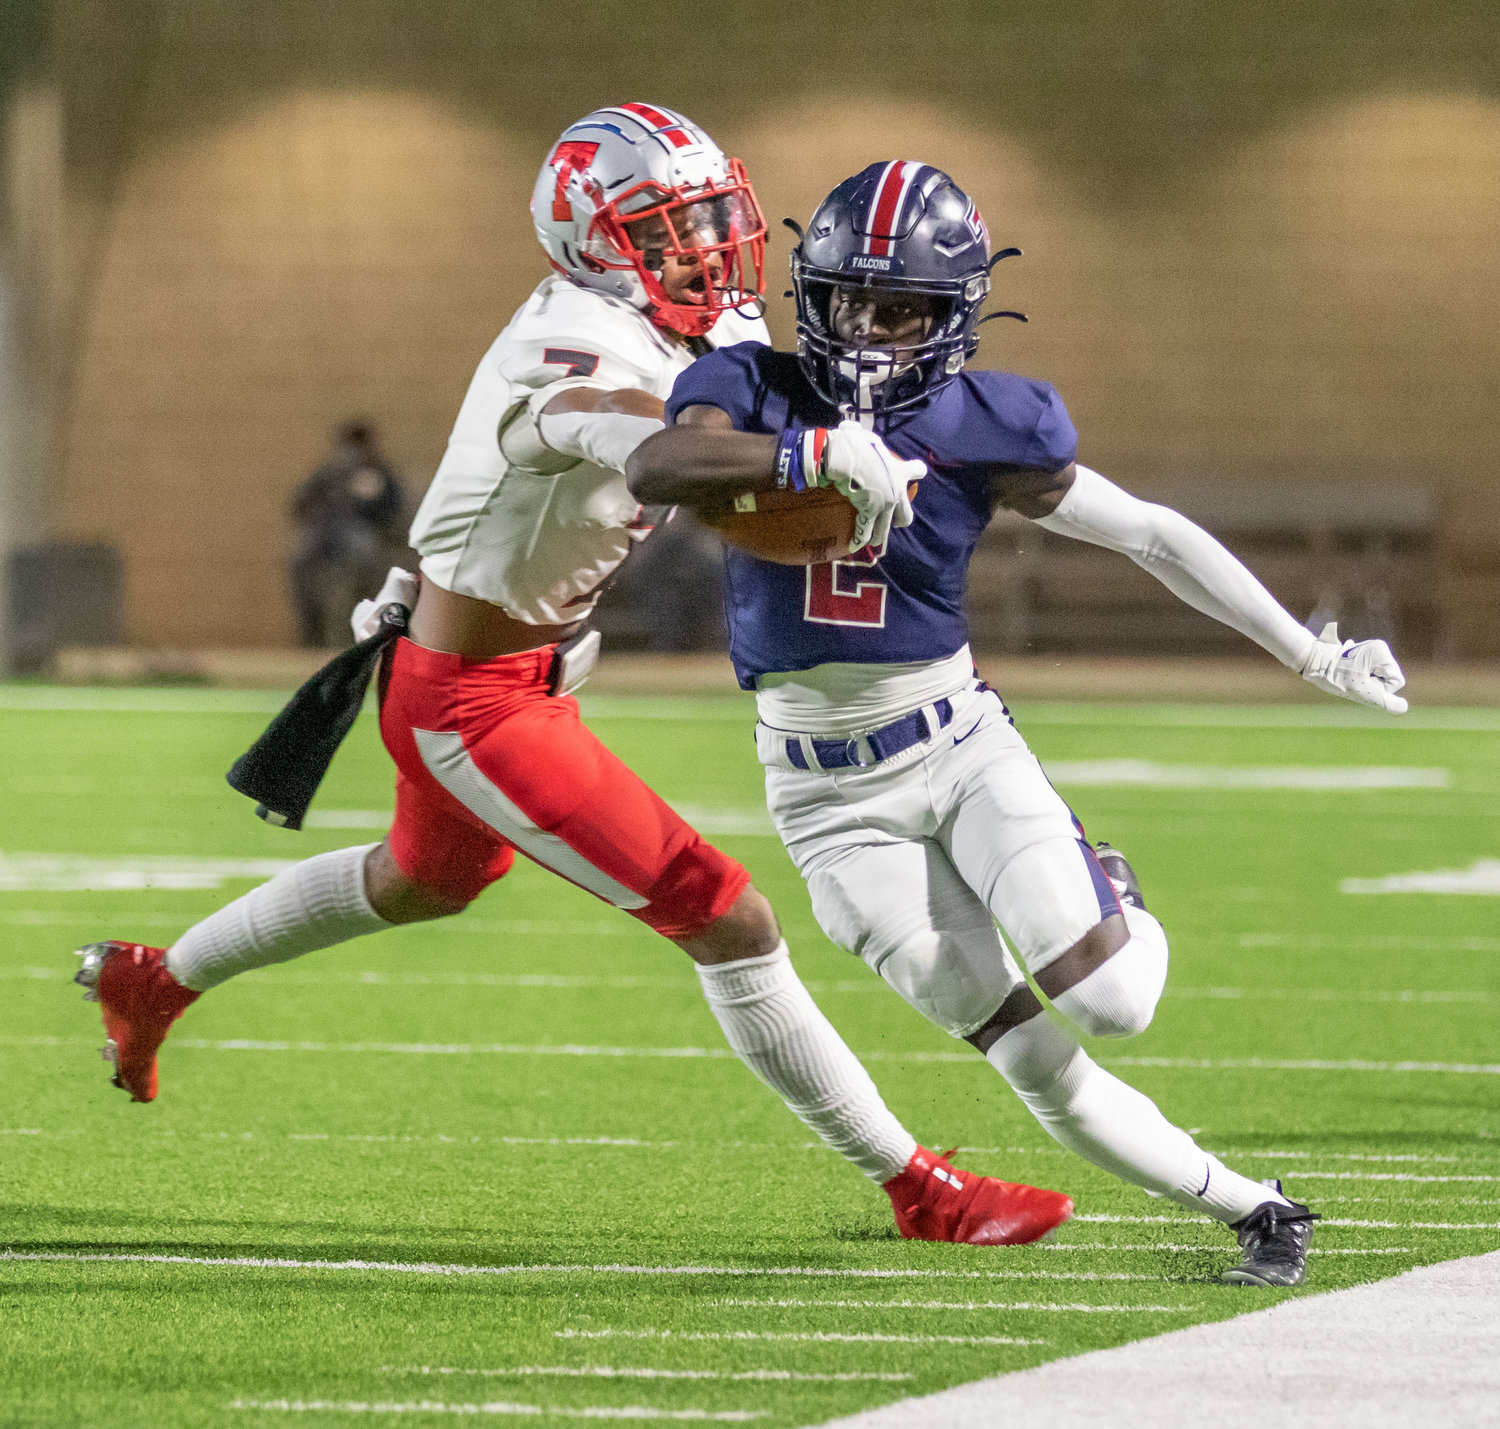 Tompkins senior running back Marquis Shoulders runs with the ball during the Falcons' 42-10 Class 6A Division I bi-district playoff win over Fort Bend Travis on Dec. 11 at Legacy Stadium.